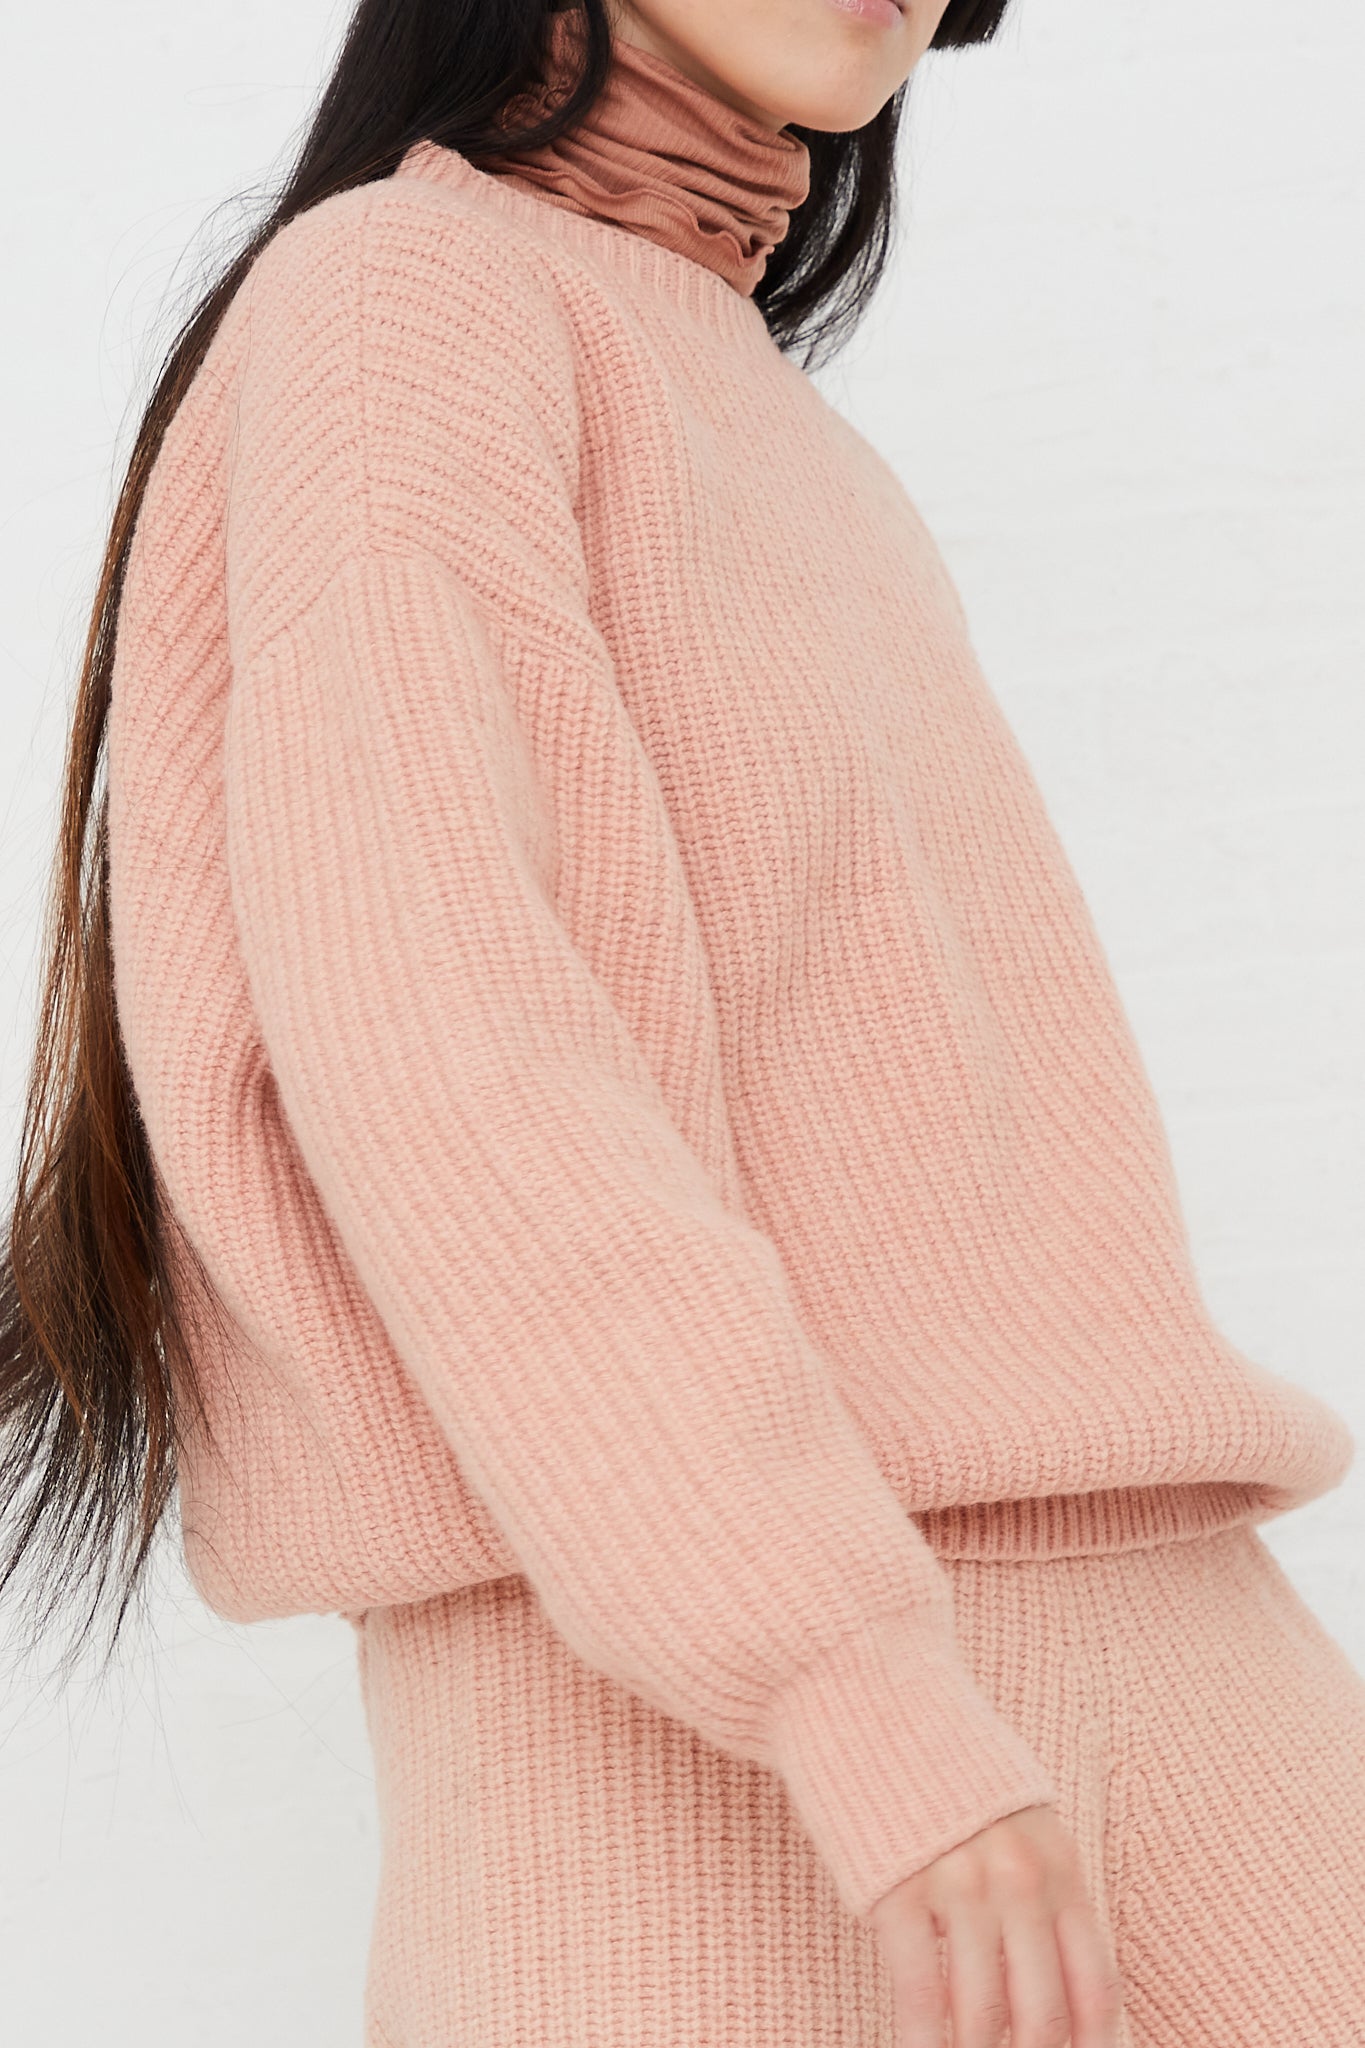 Mea Crew Neck Pullover Sweater in Pink by Baserange for Oroboro Front